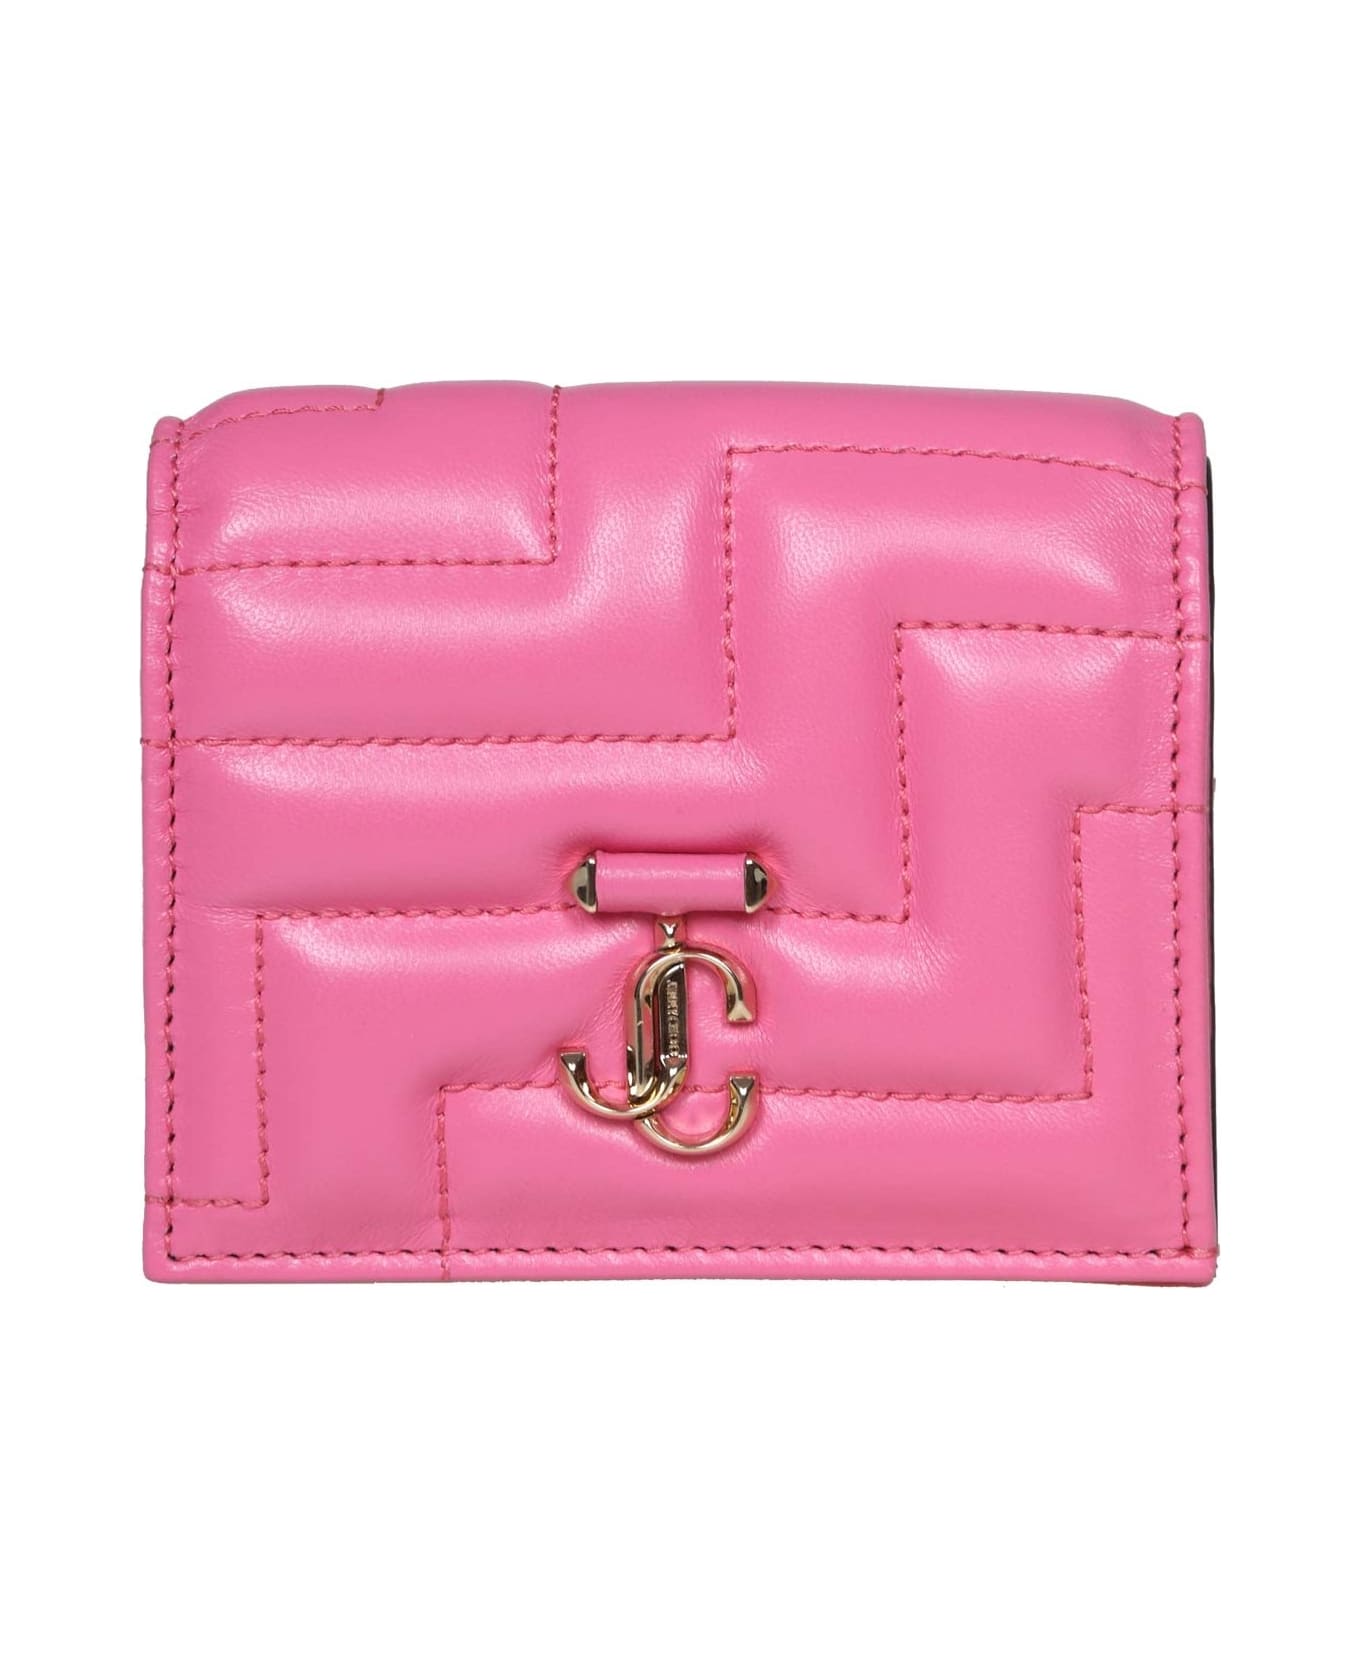 Jimmy Choo Wallet In Nappa Avenue Color Pink - Pink ベルト